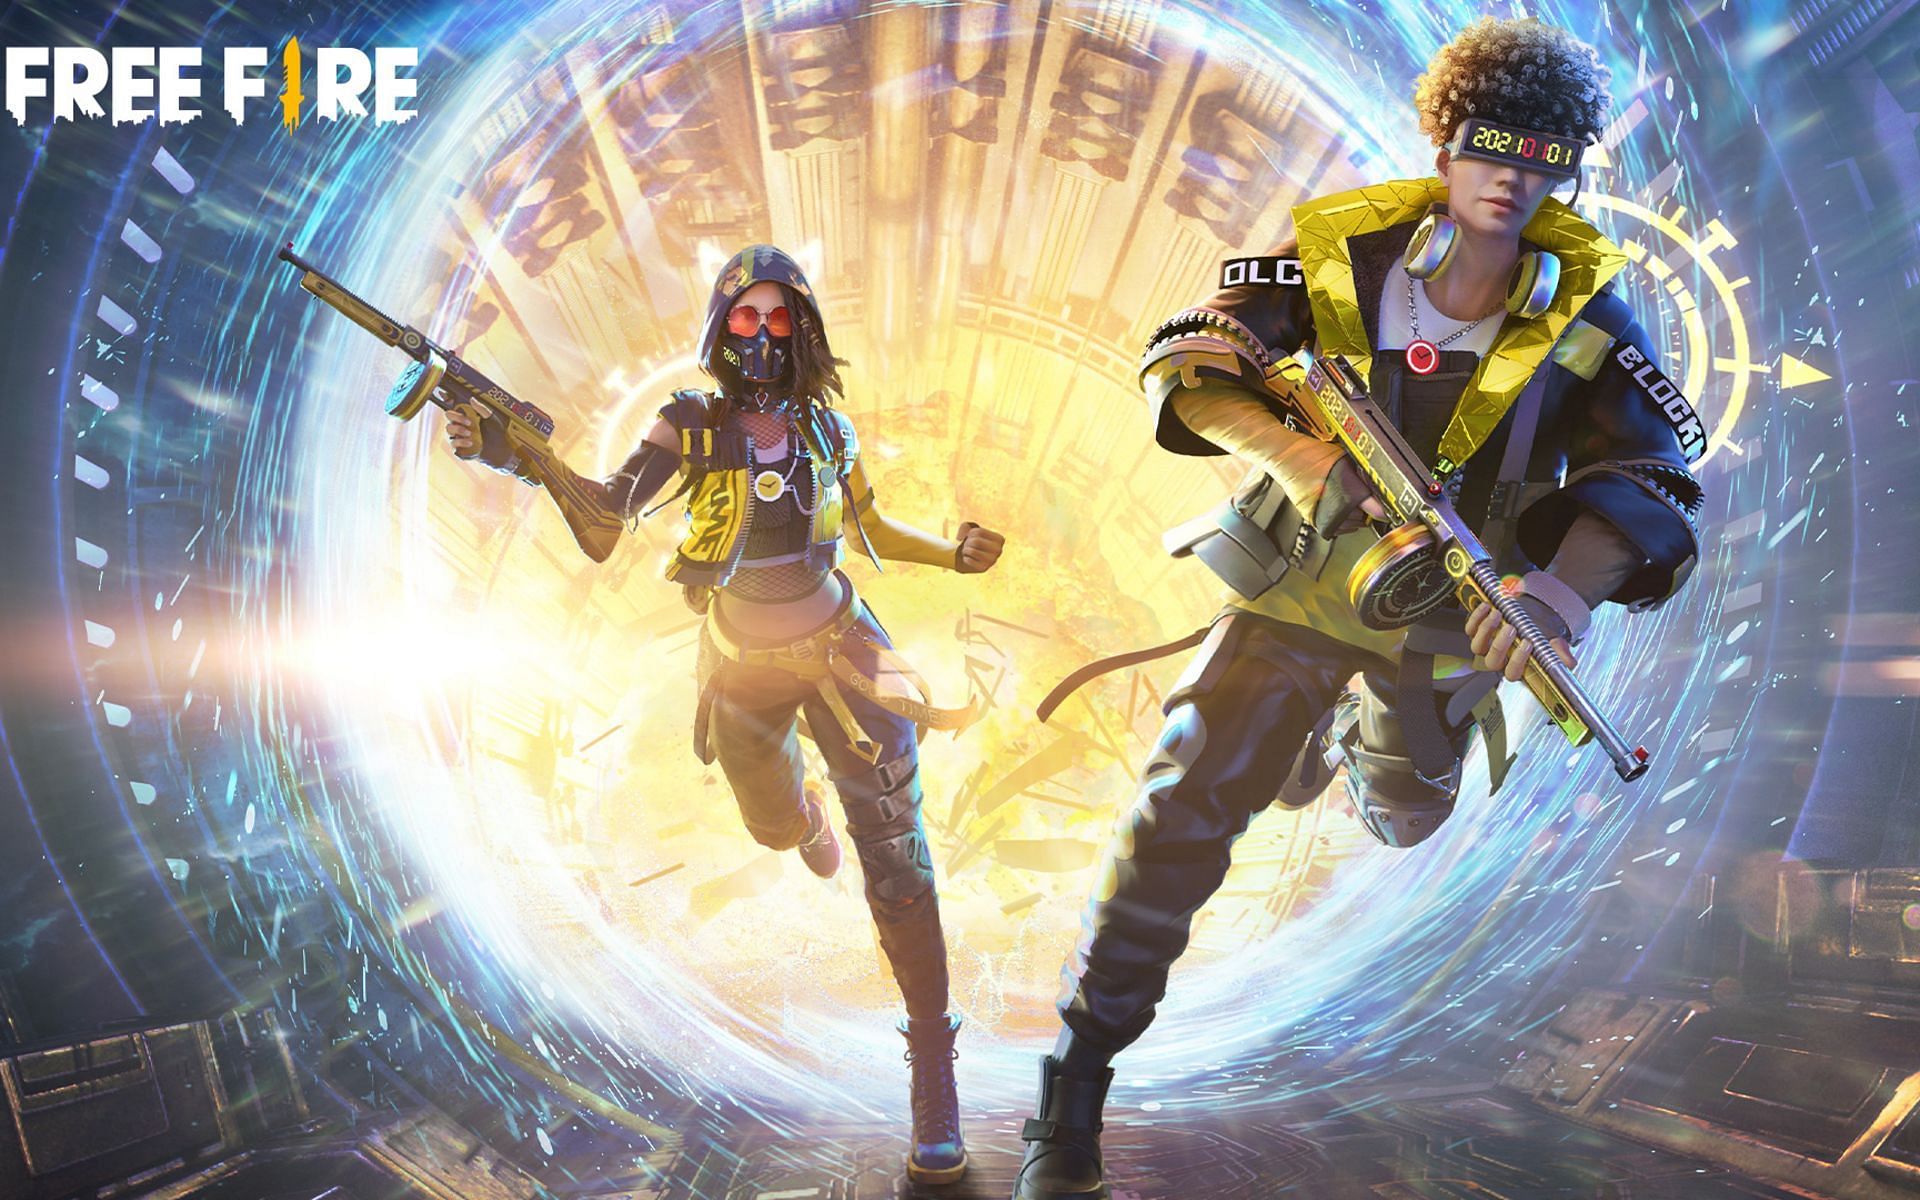 Download & Play Free Fire on PC & Mac in Android 11